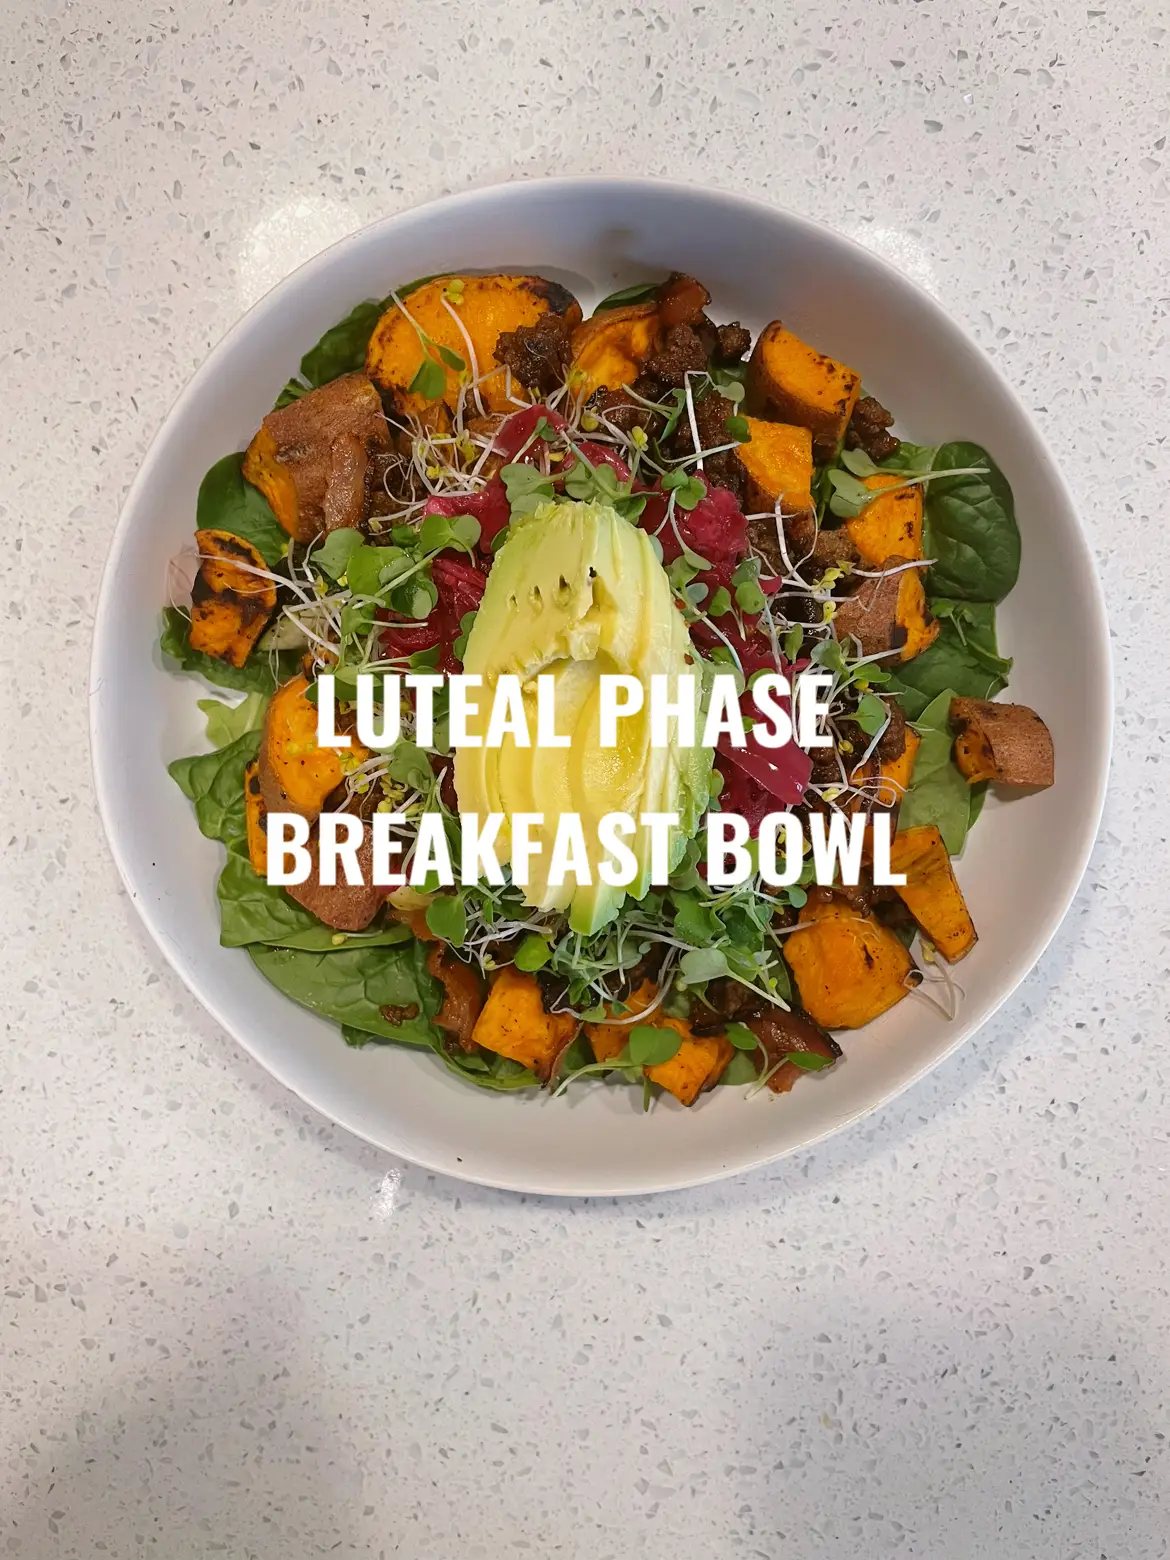 luteal phase foods, Gallery posted by janae 🧚‍♀️